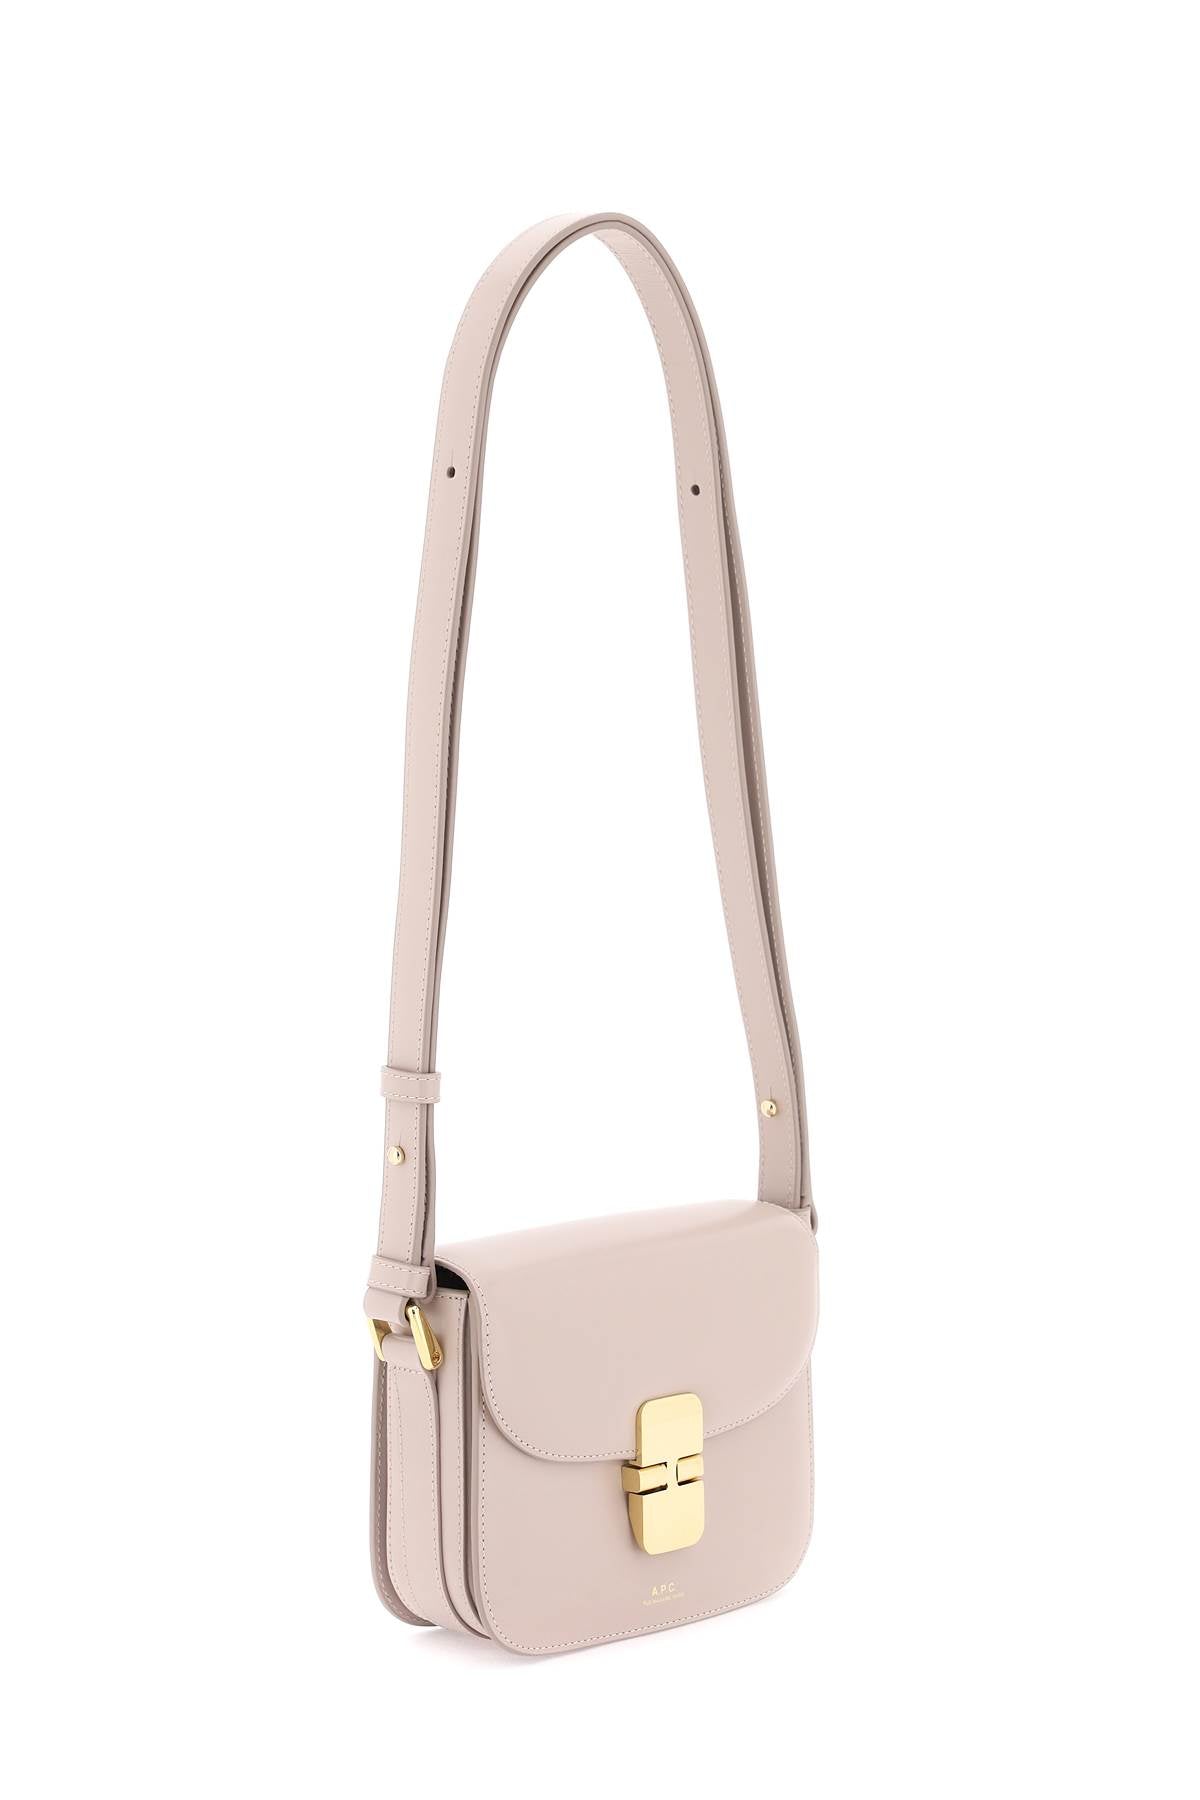 A.P.C. Grace Mini Multicolor Leather Handbag with Adjustable Strap and Gold-Tone Accents